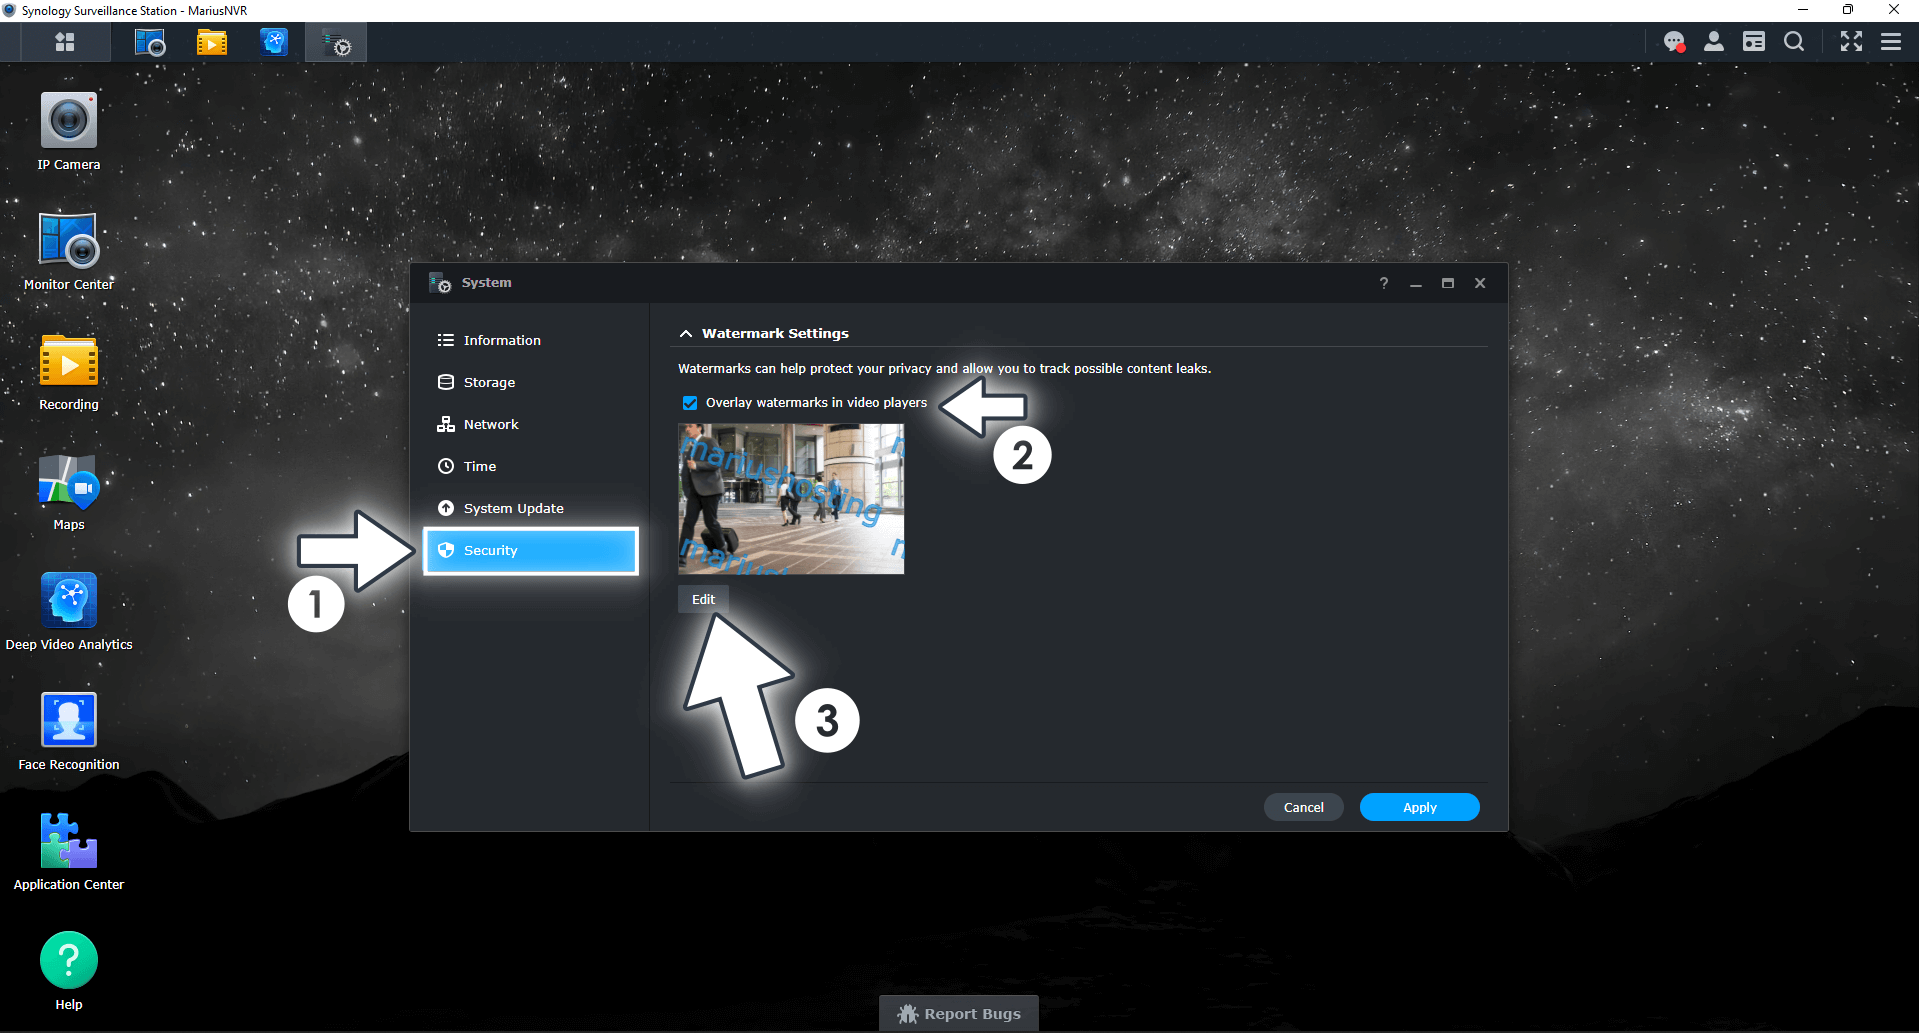 2 Synology Surveillance Station Add Watermark in Live Camera Feed